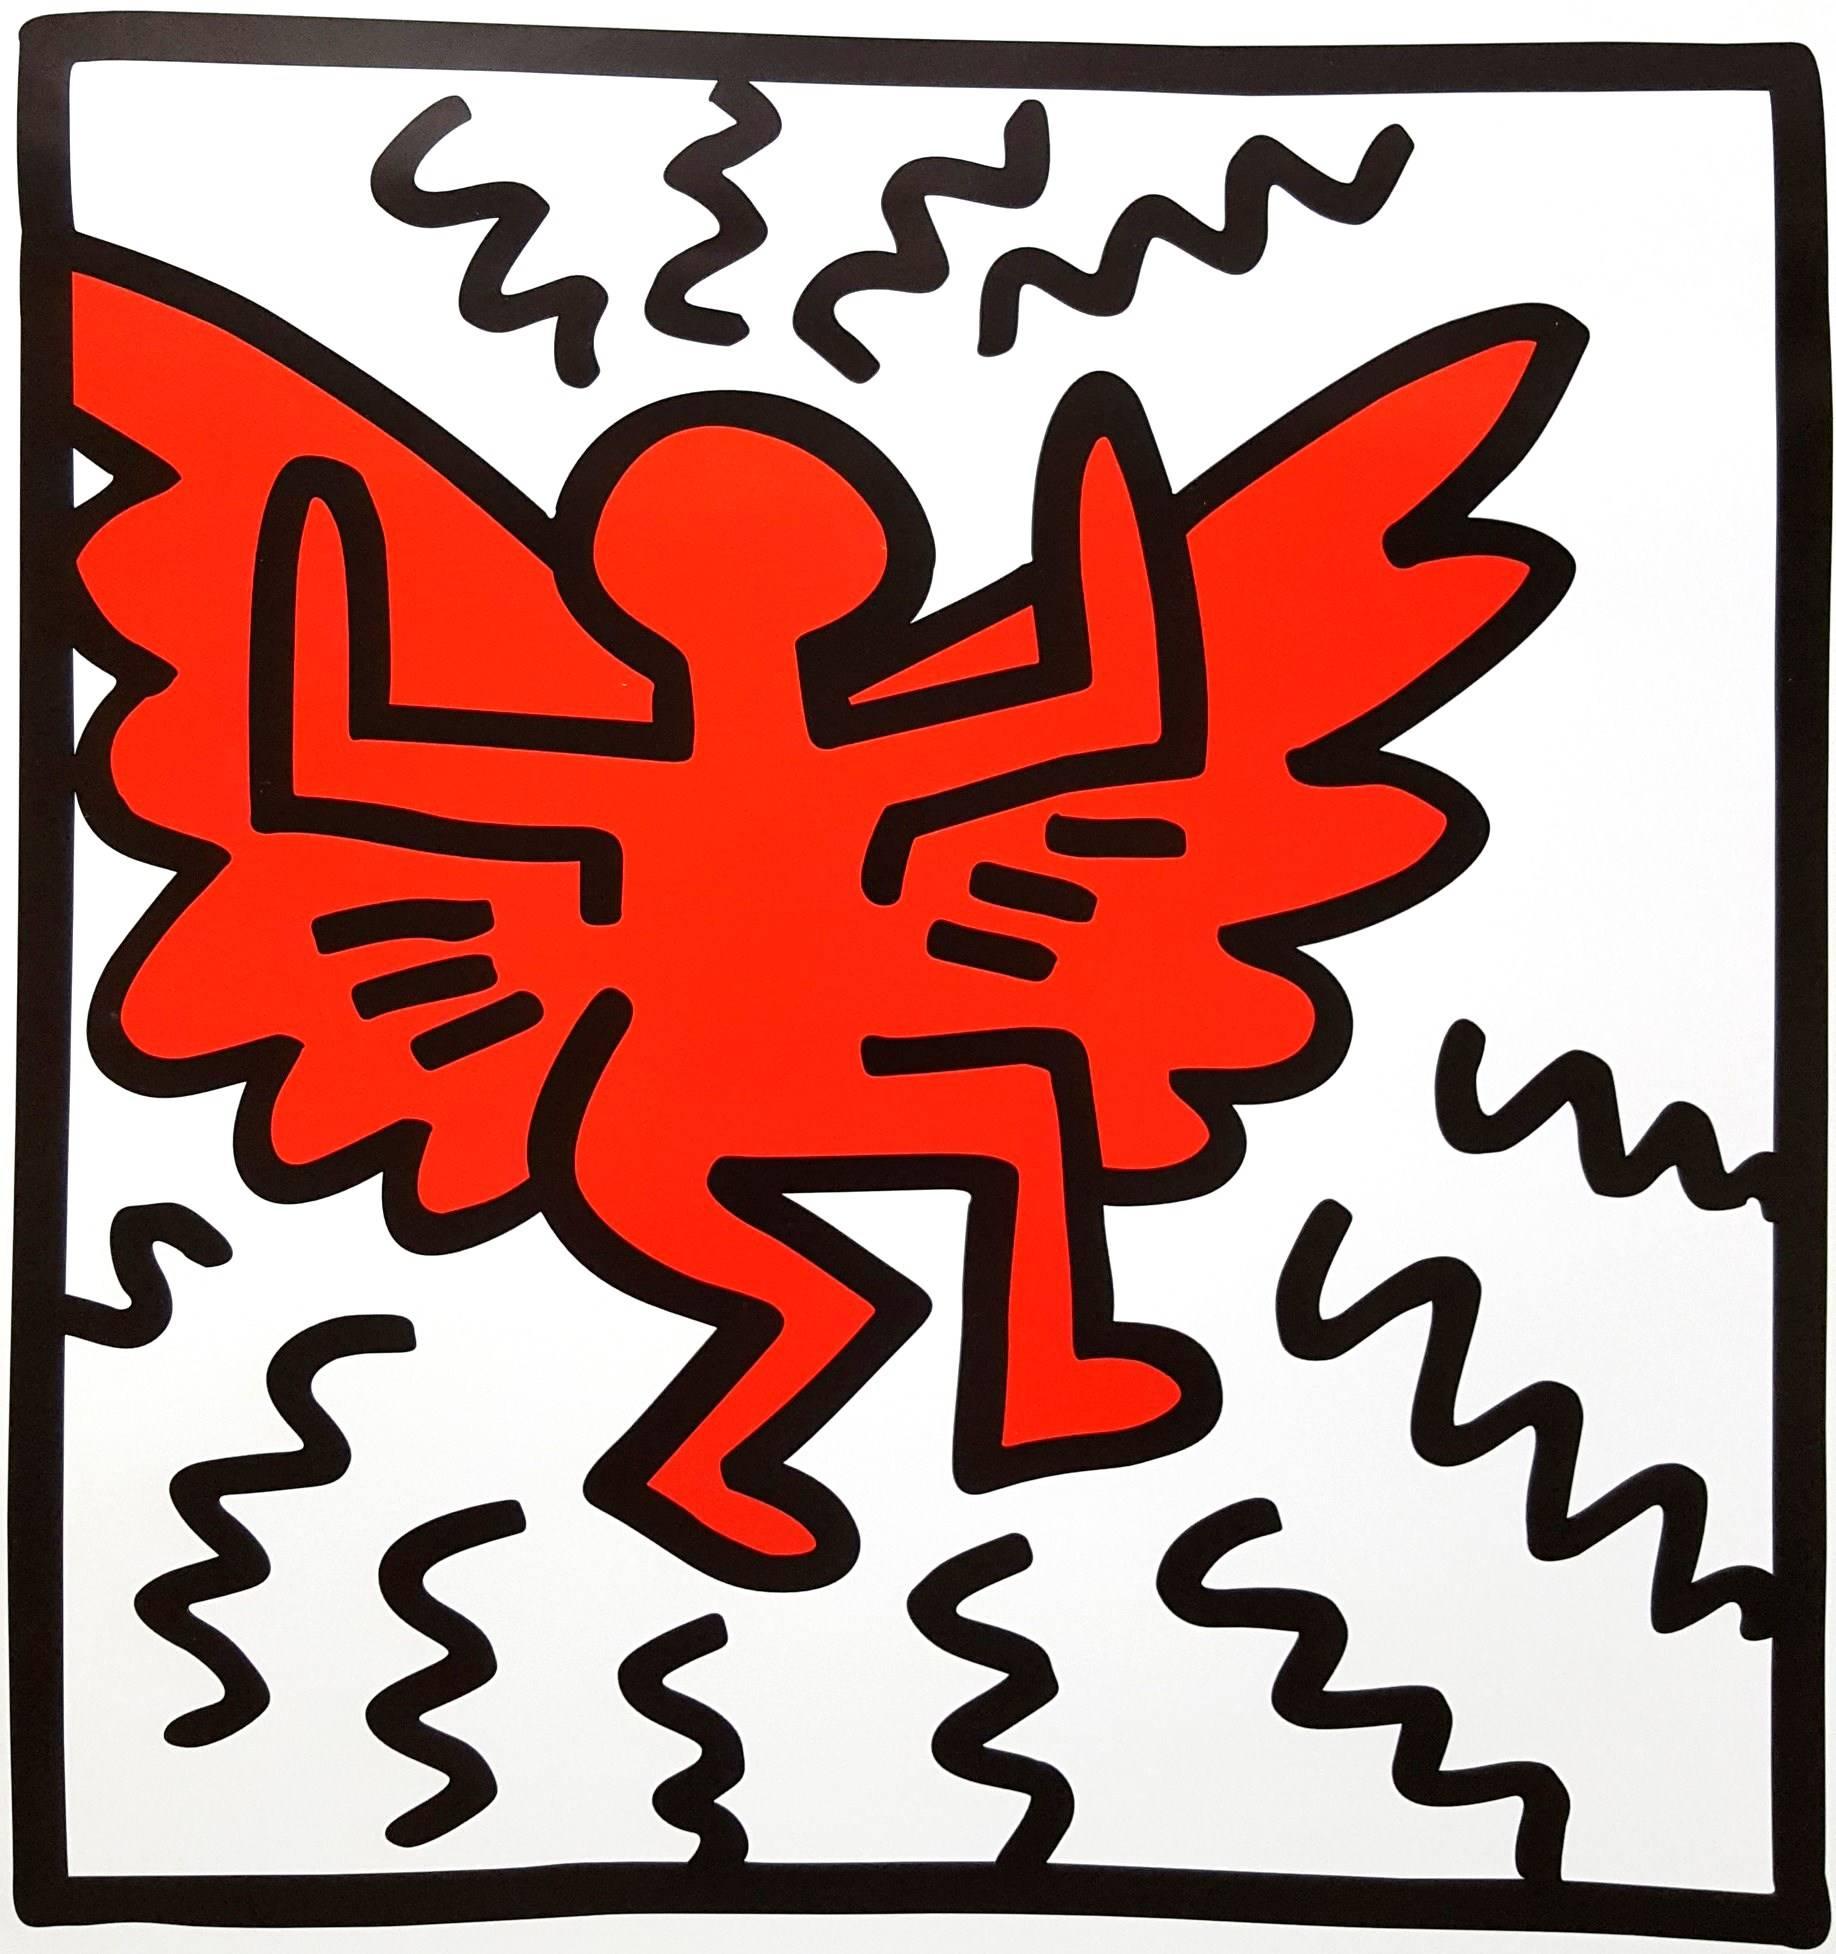 The Keith Haring Altarpiece: An AIDS Memorial Chapel Project - Print by (after) Keith Haring